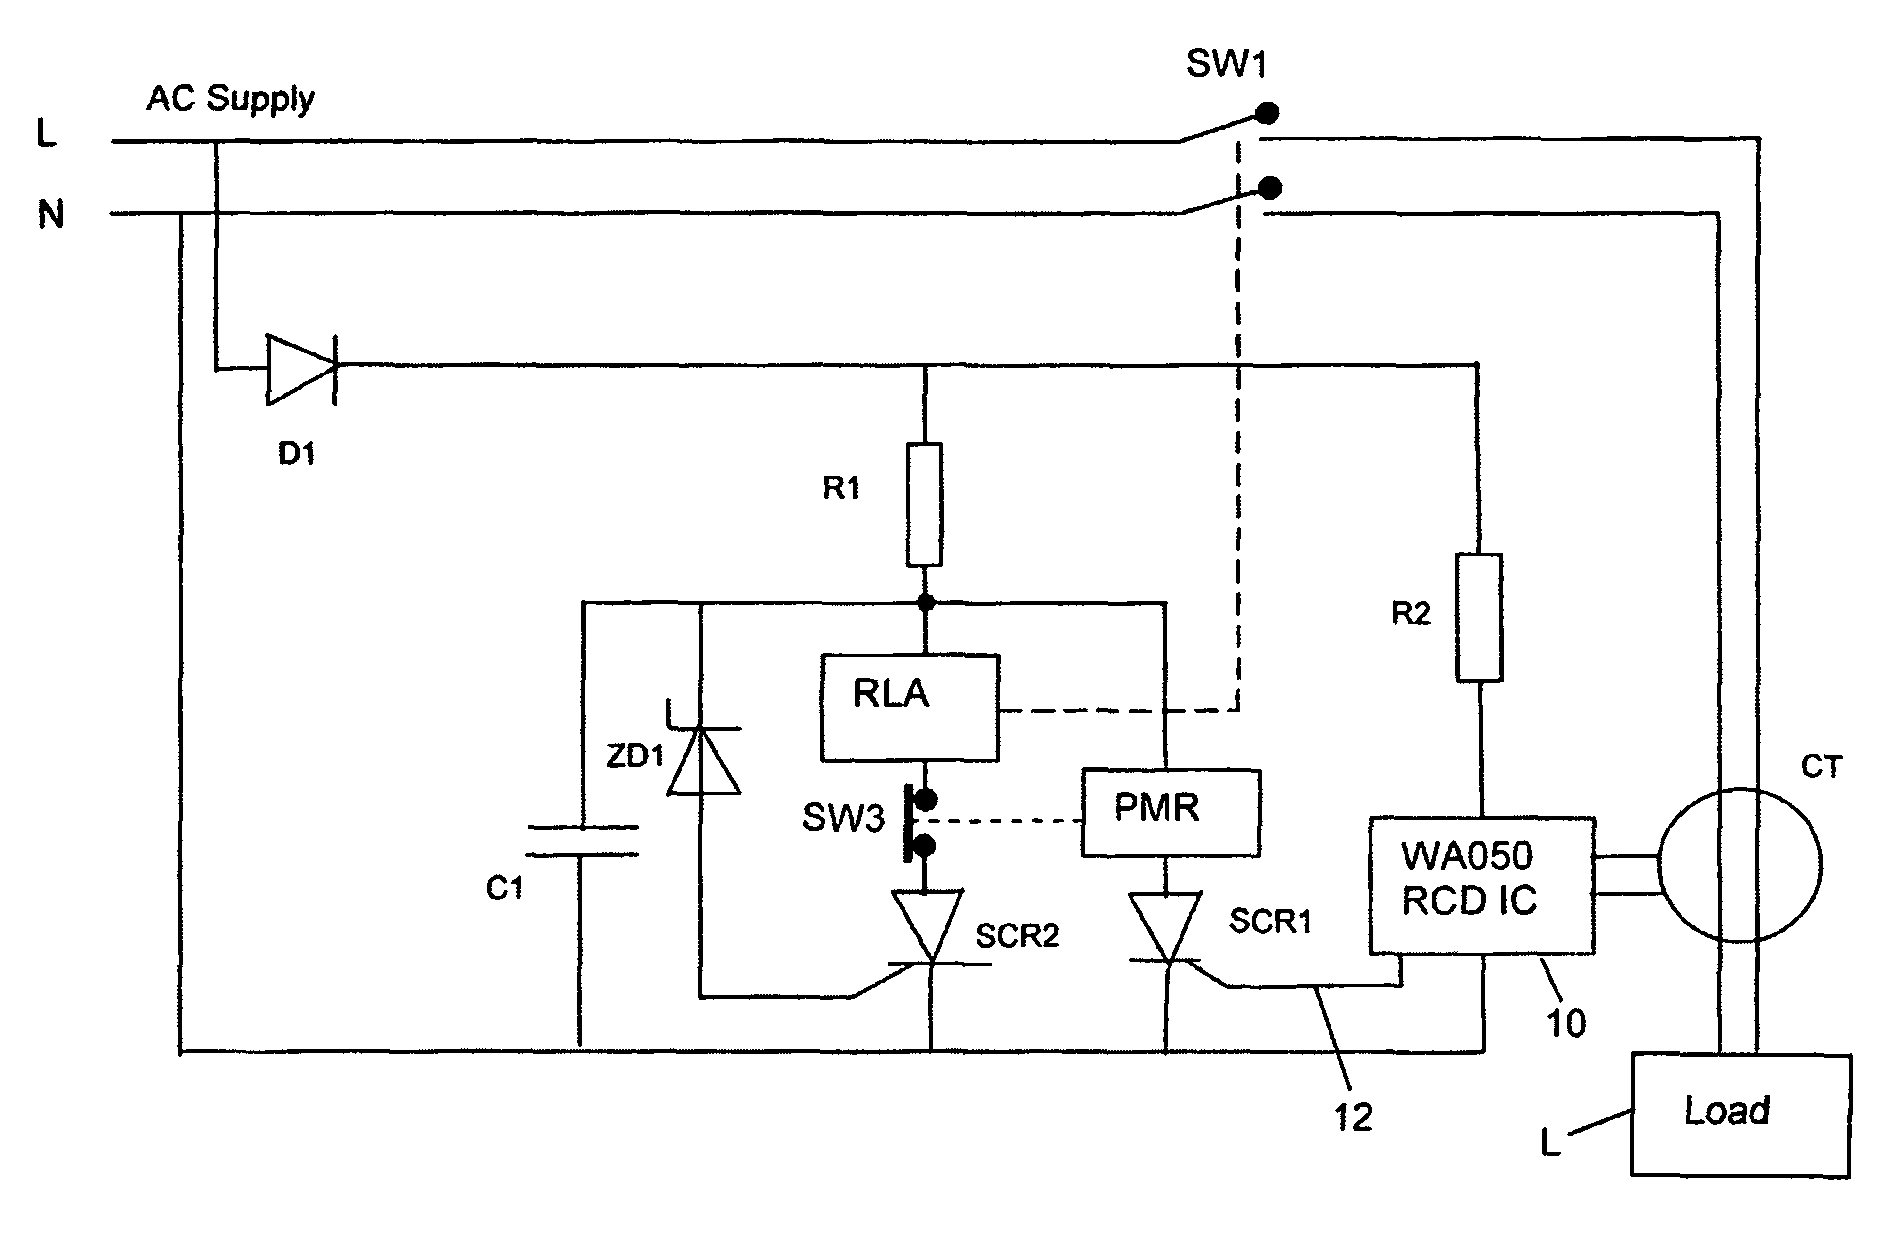 Residual current device